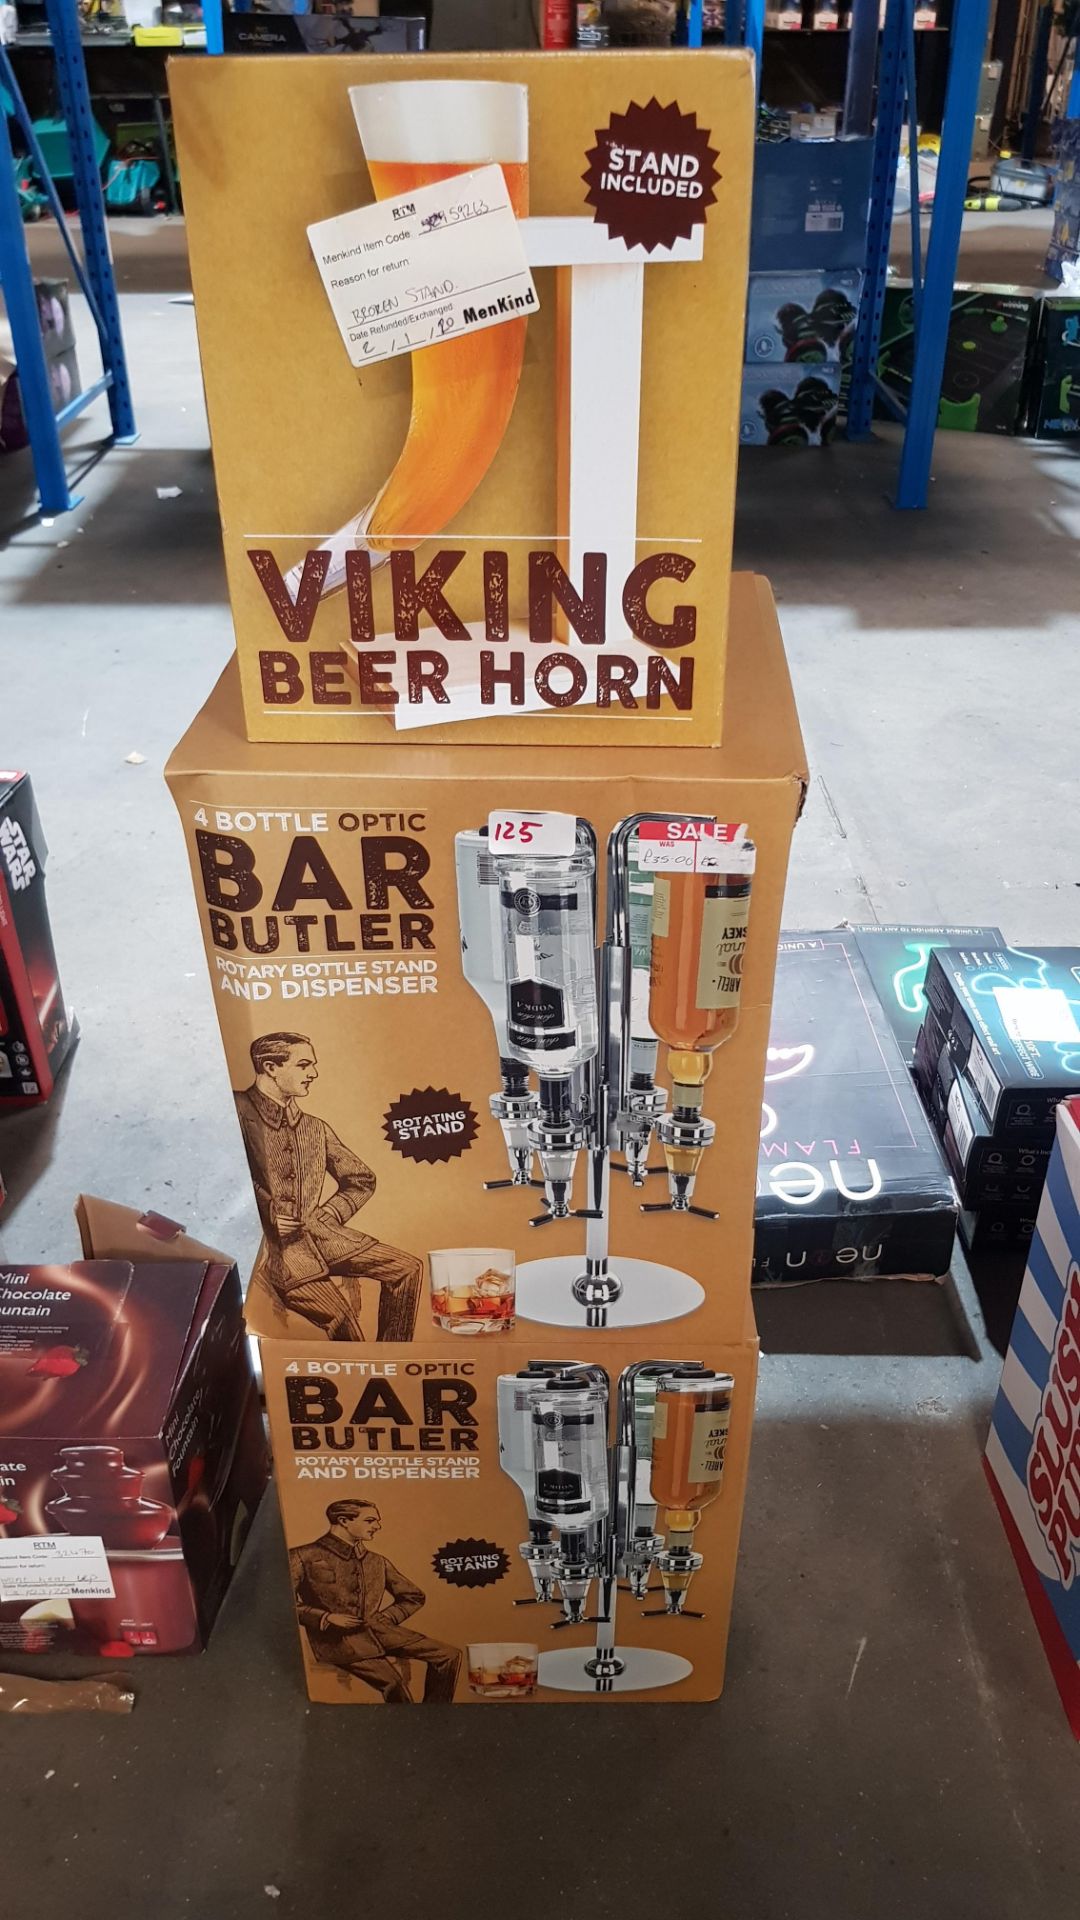 (R3N) 3 Items. 2x 4 Bottle Optic Bar Butler. 1x Viking Beer Horn. (All With RTM Stickers) - Image 3 of 3